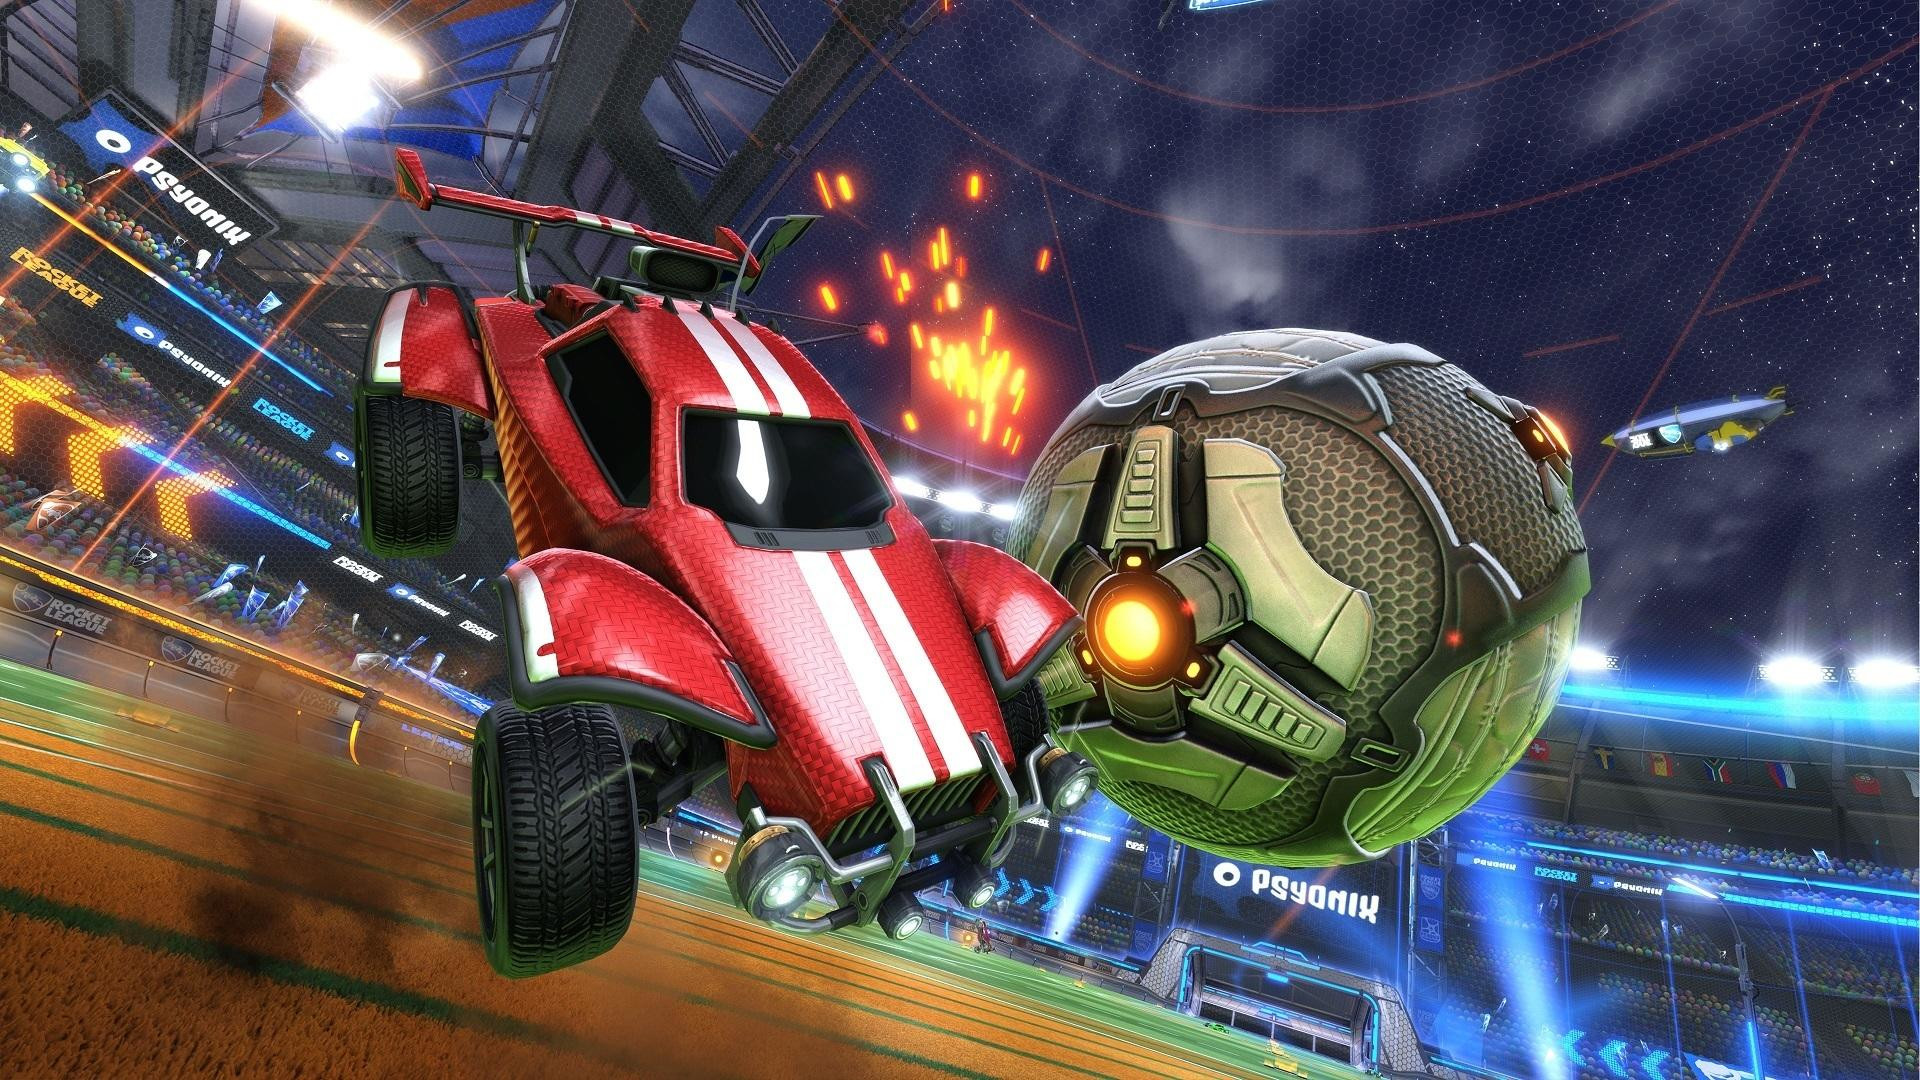 Rocket League clears: An Octane car hitting the ball as it falls to the ground.